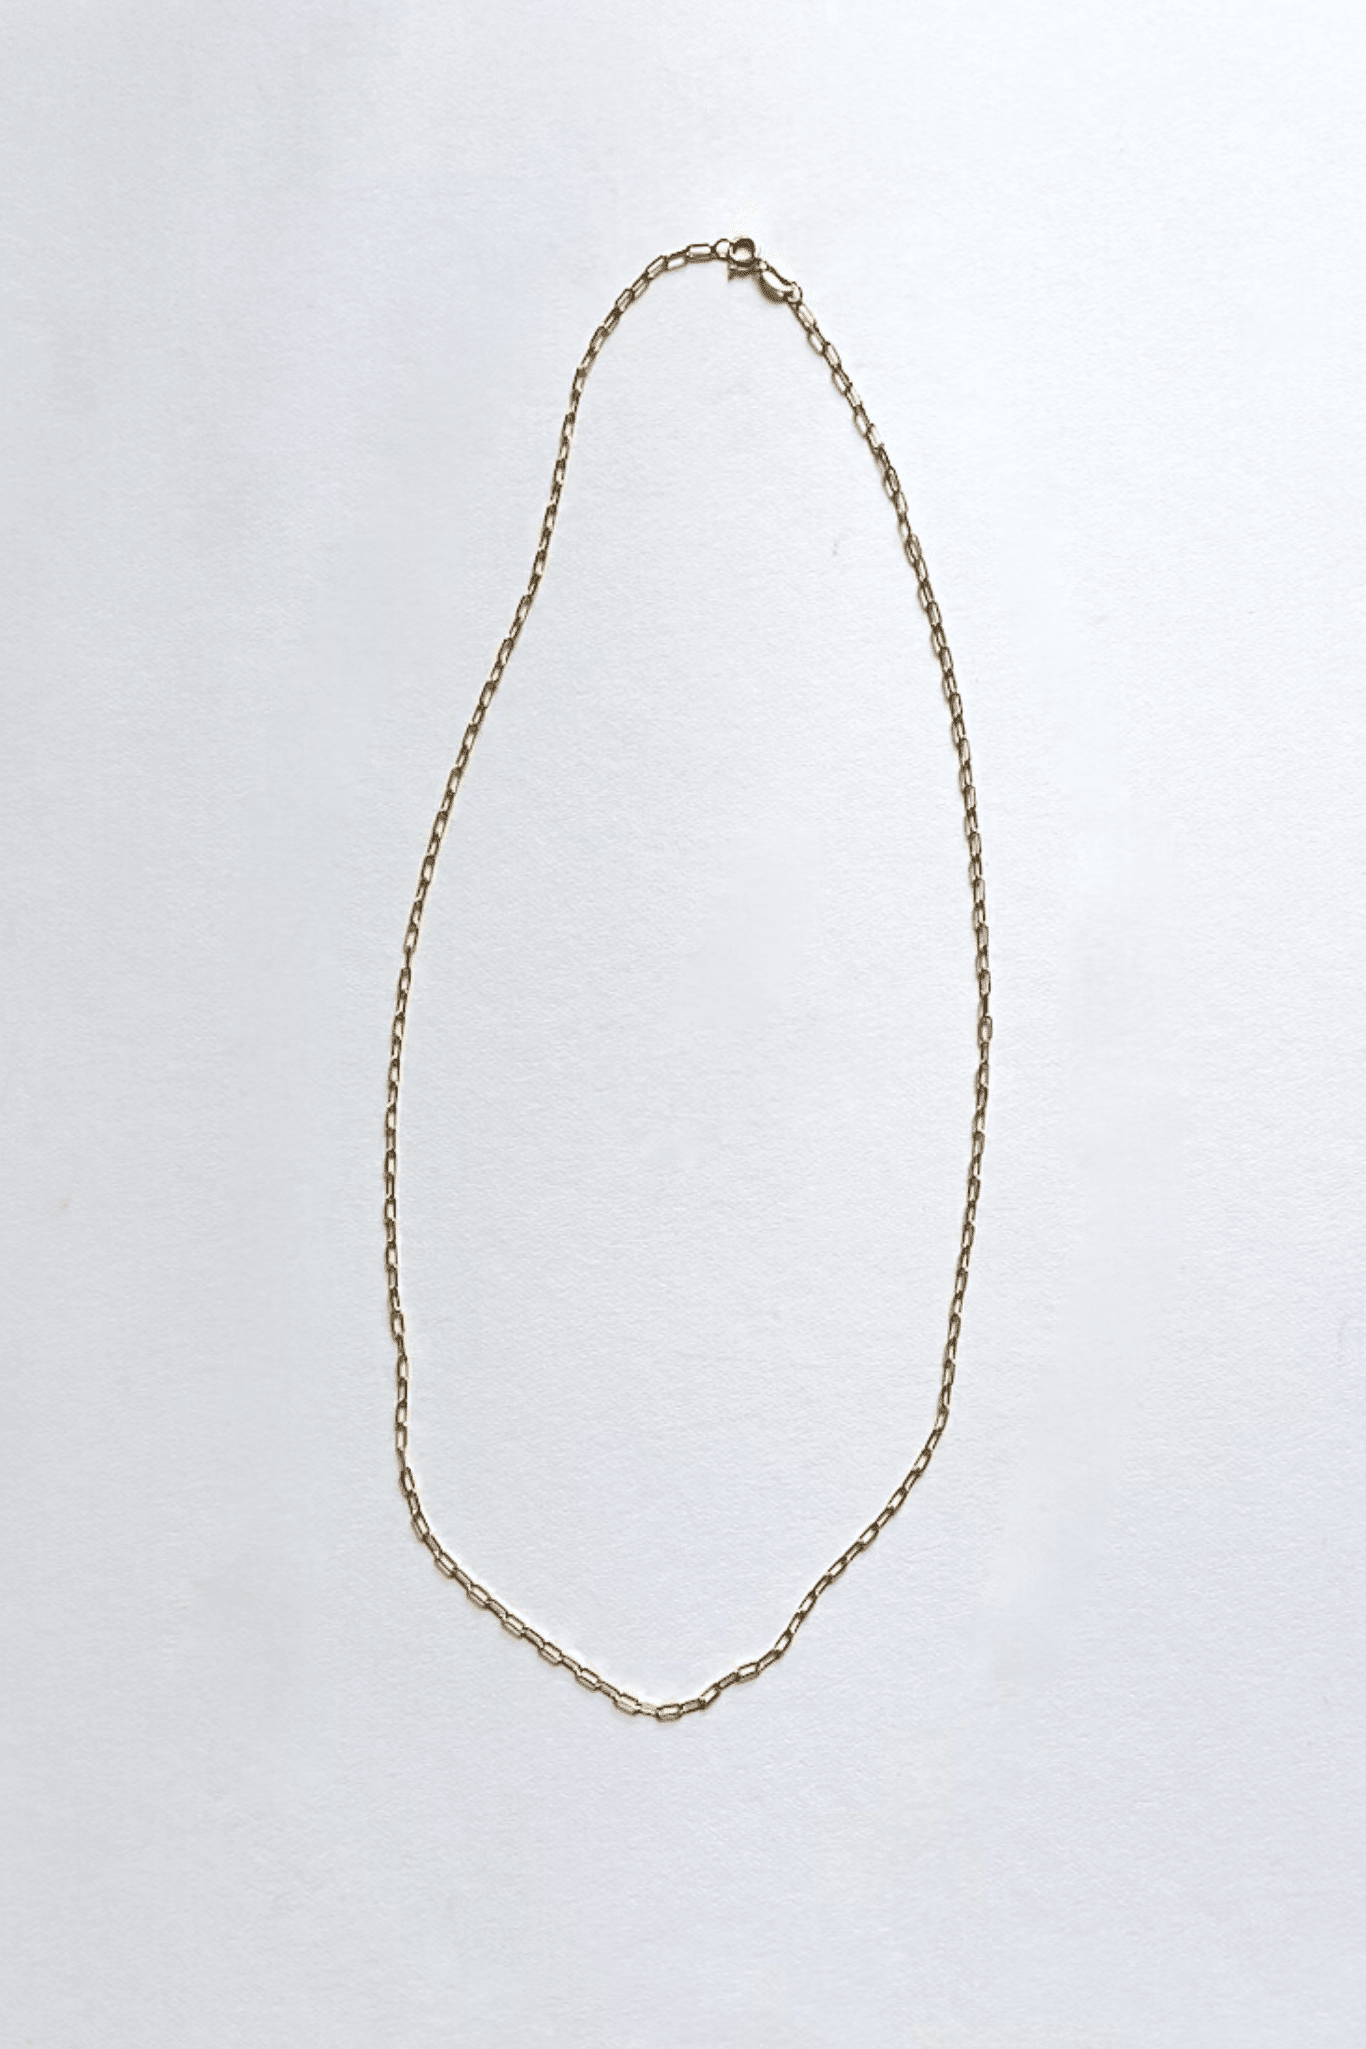 Carrie Hoffman - 14K Mini Paperclip Chain